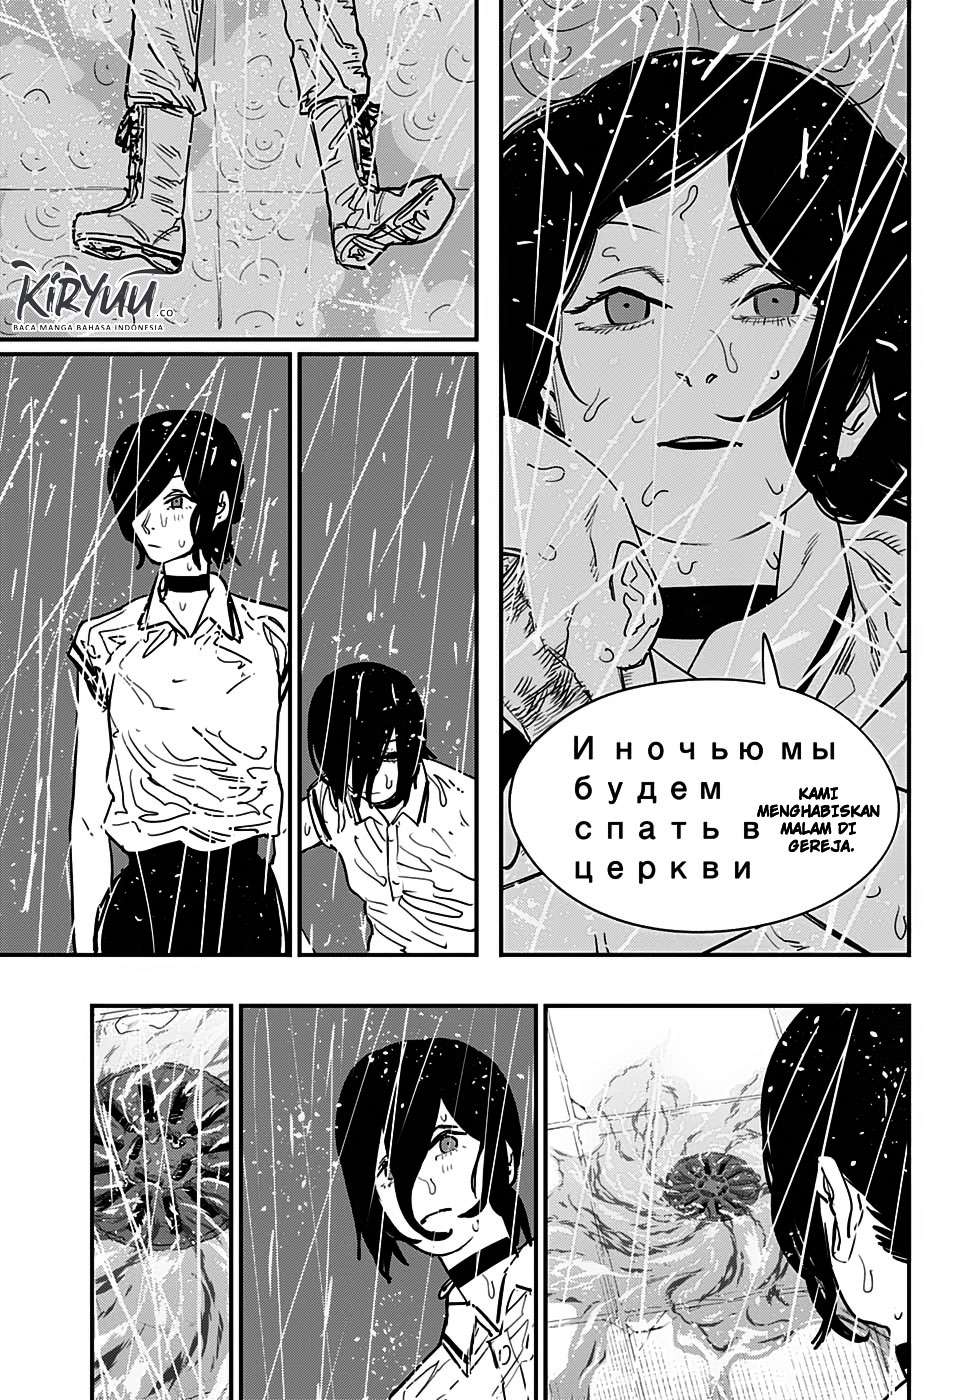 Chainsaw Man Chapter 43 Bahasa Indonesia